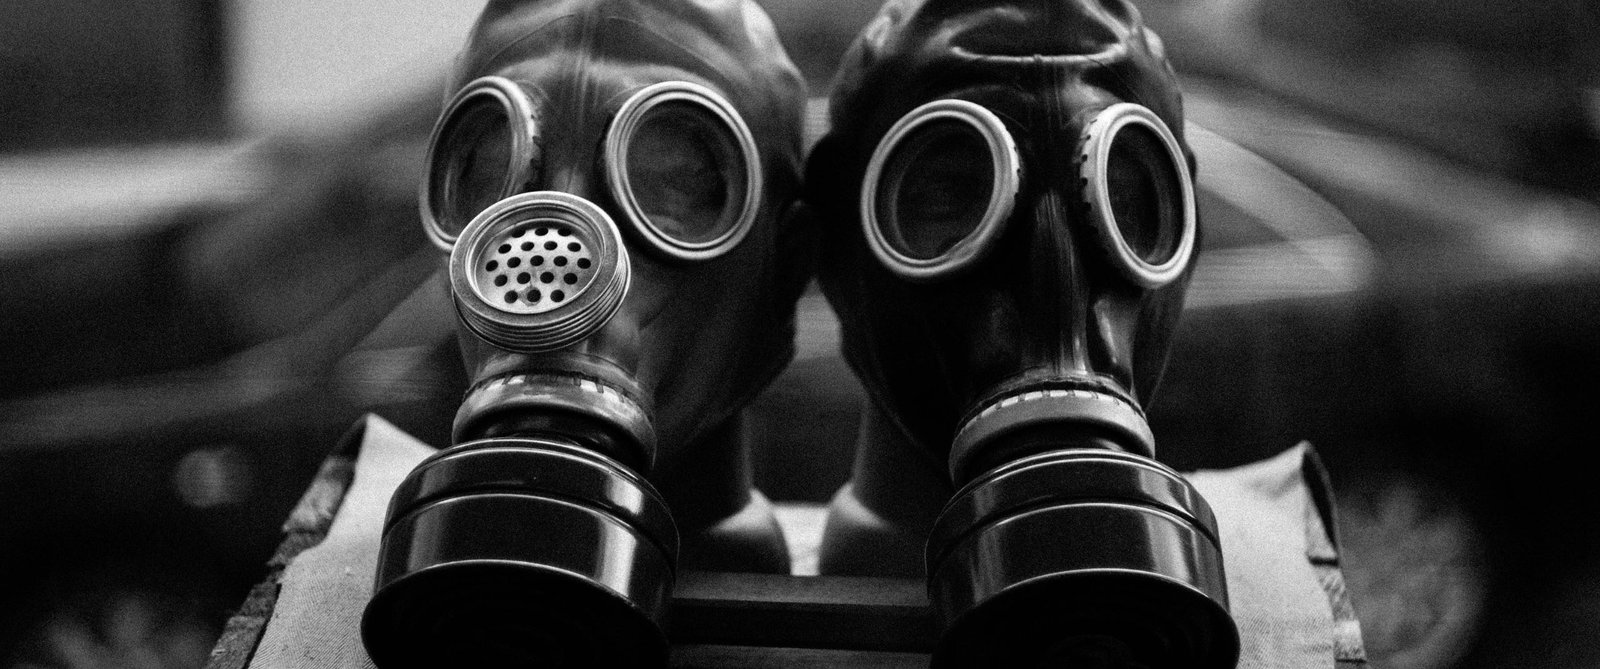 How to Identify Safety Risks: GP5 Gas Mask Contain Asbestos?